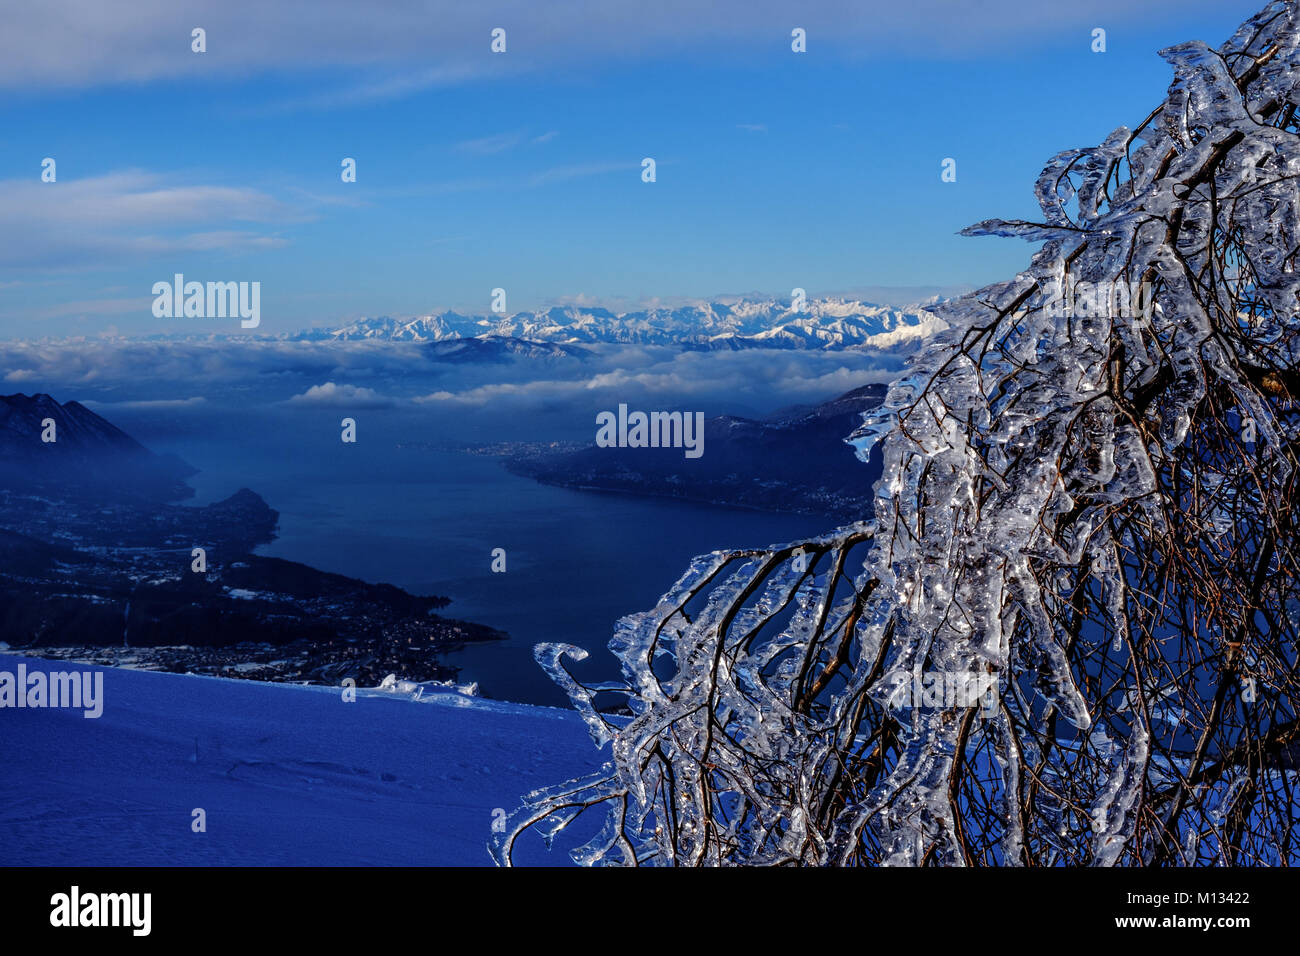 Frozen tree and a view of Lake Maggiore with Mt. Rosa mountain range in winter Stock Photo